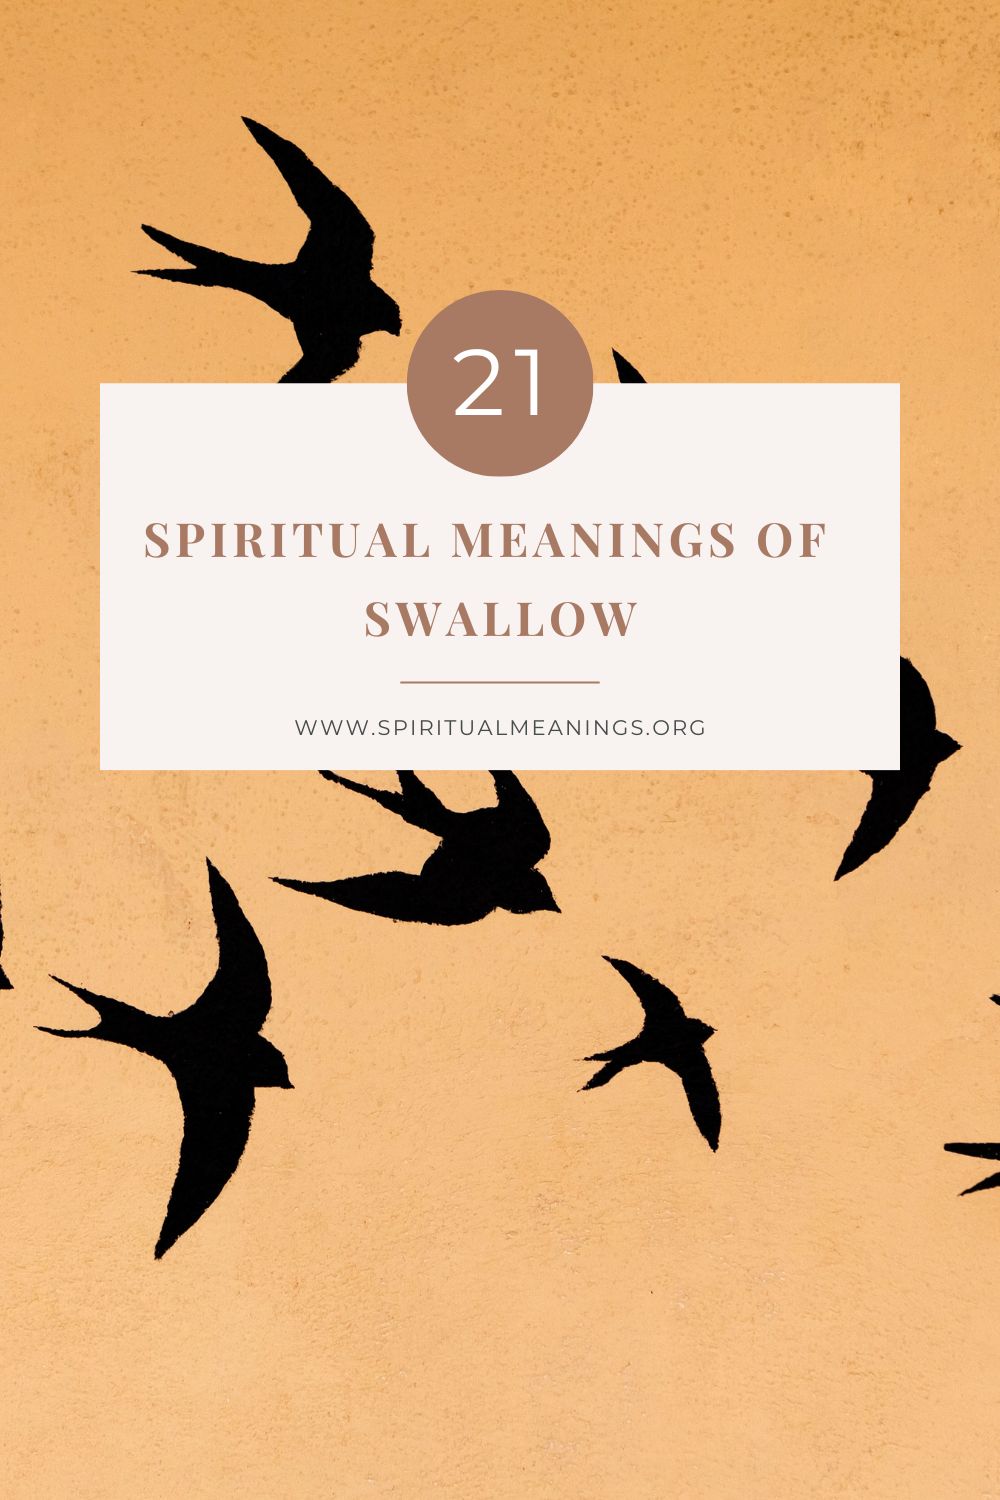 21 Spiritual Meanings of Swallow